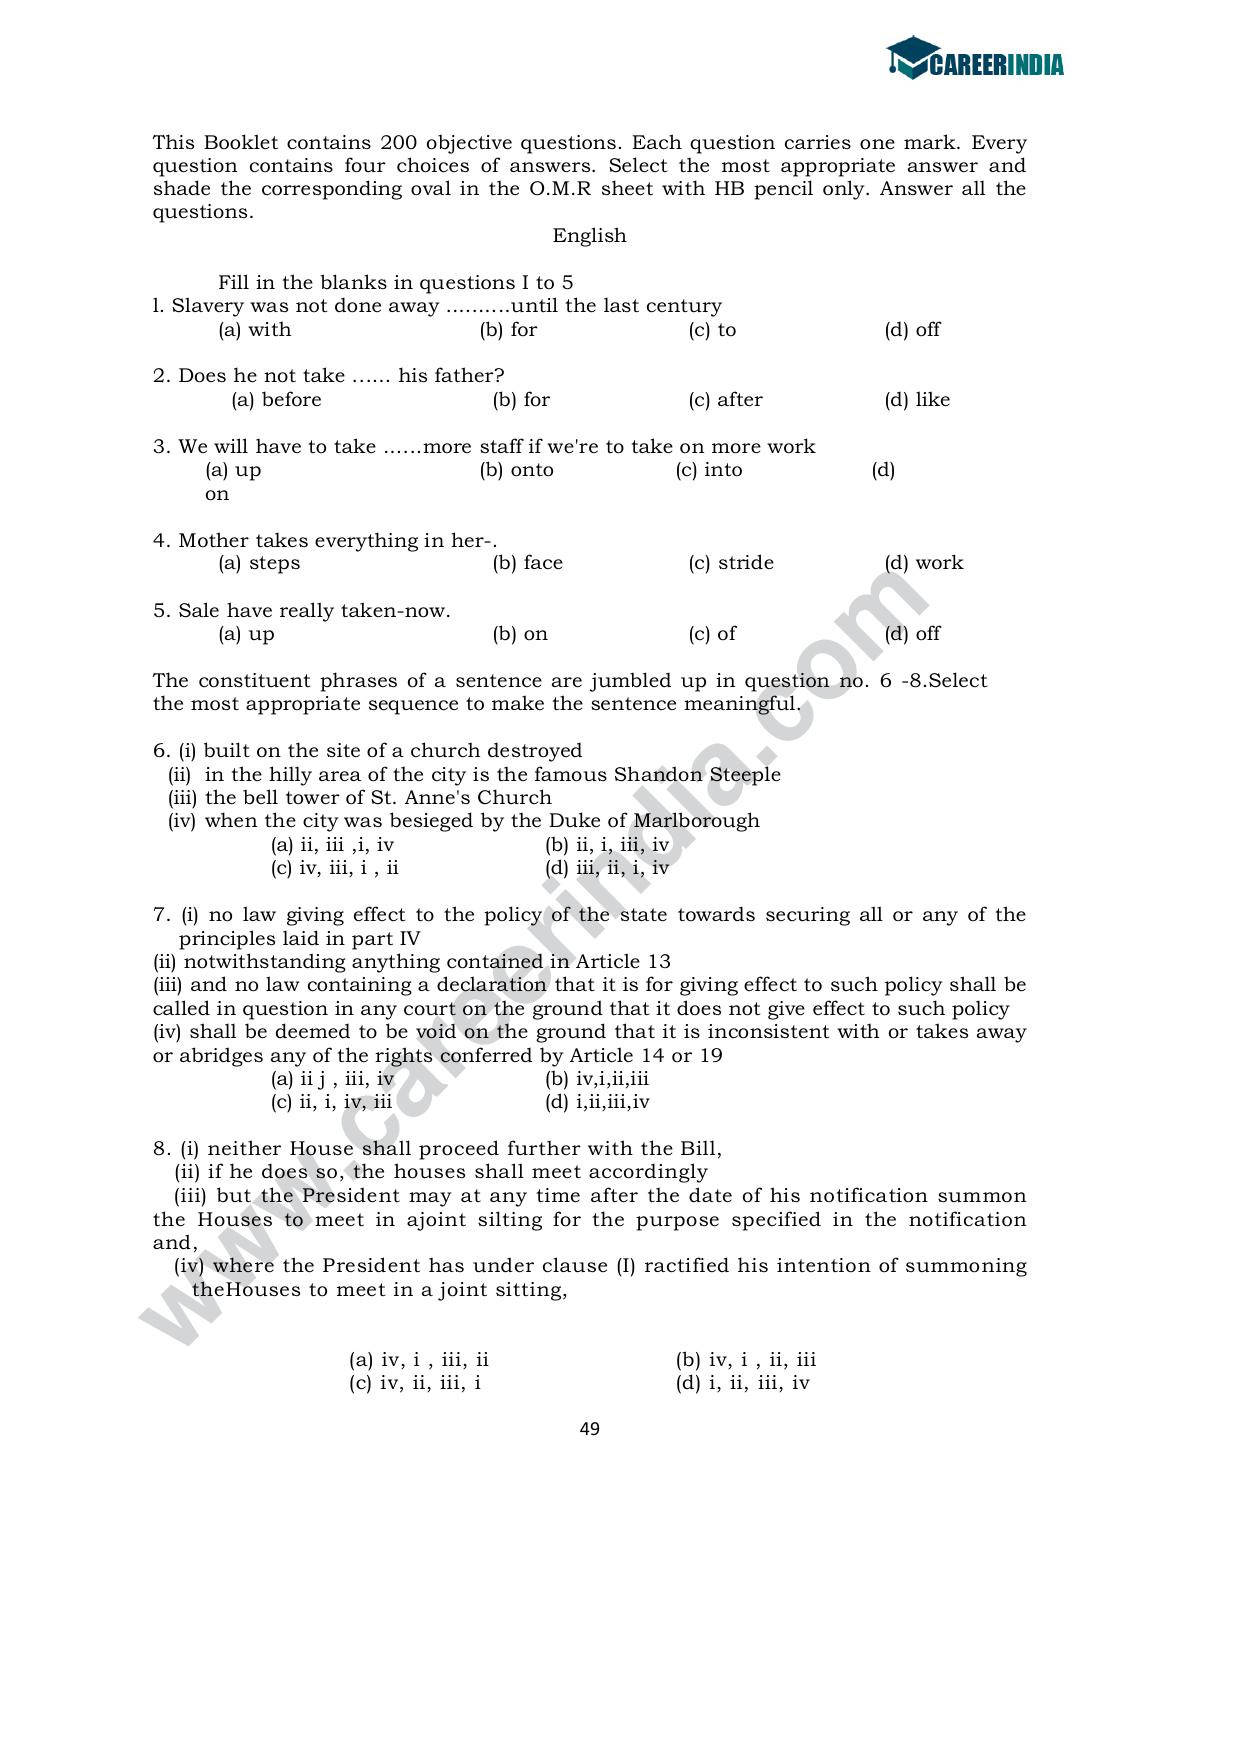 CLAT 2010 UG Sample Question Paper - Page 2